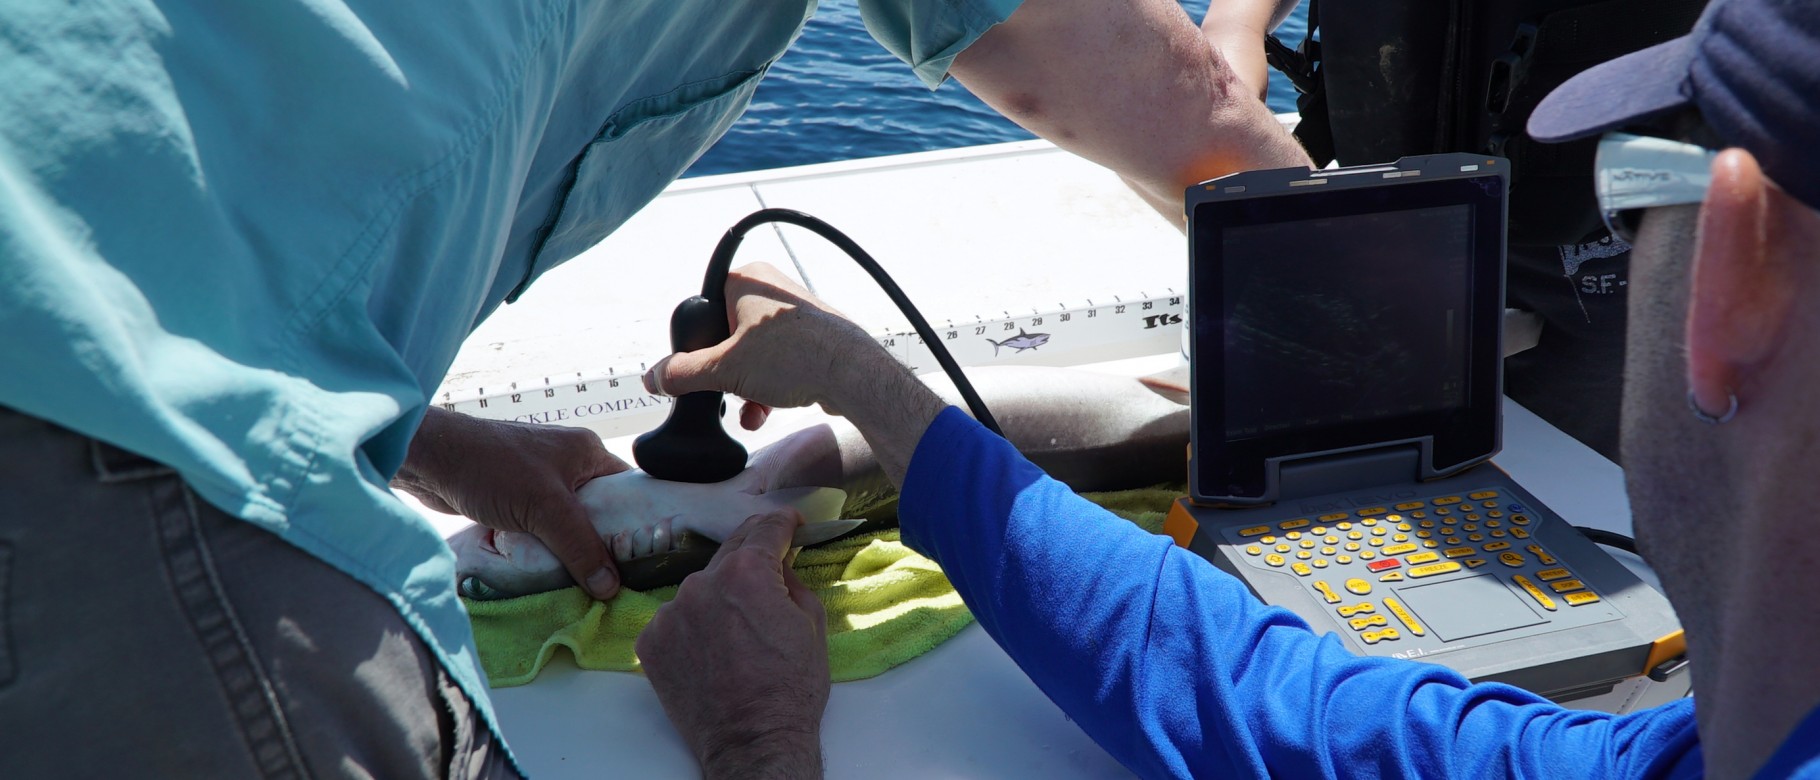 James Sulikowski uses portable ultrasound technology to study a pregnant spiny dogfish